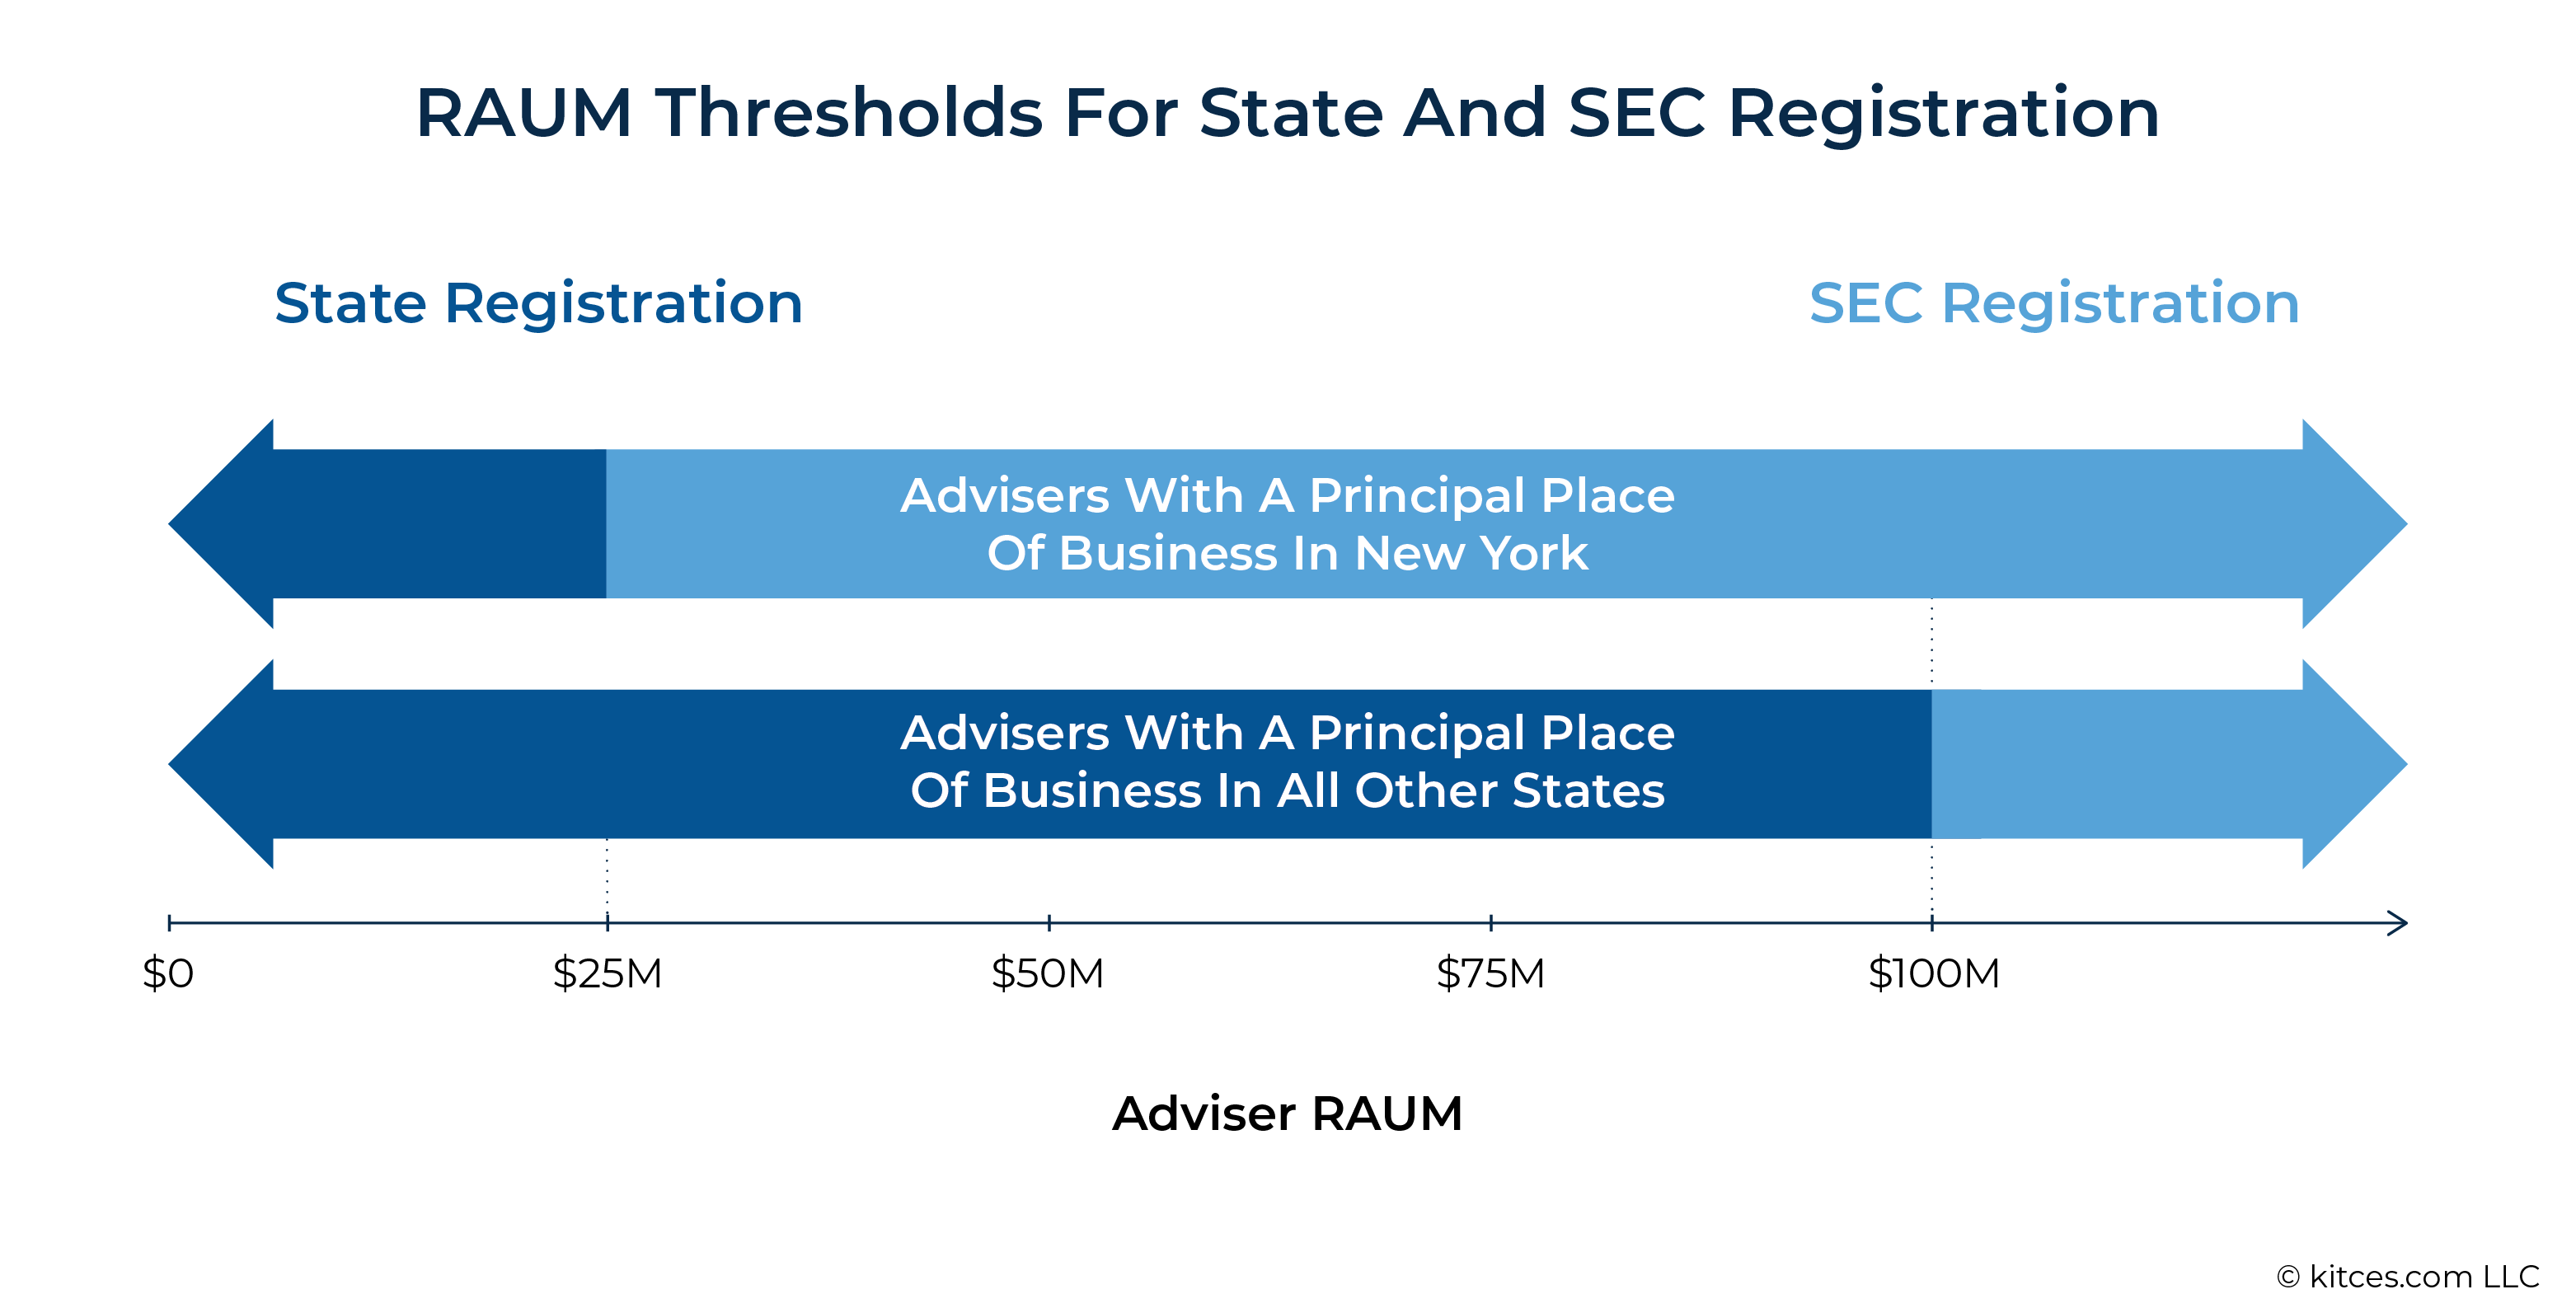 RAUM Thresholds For State And SEC Registration